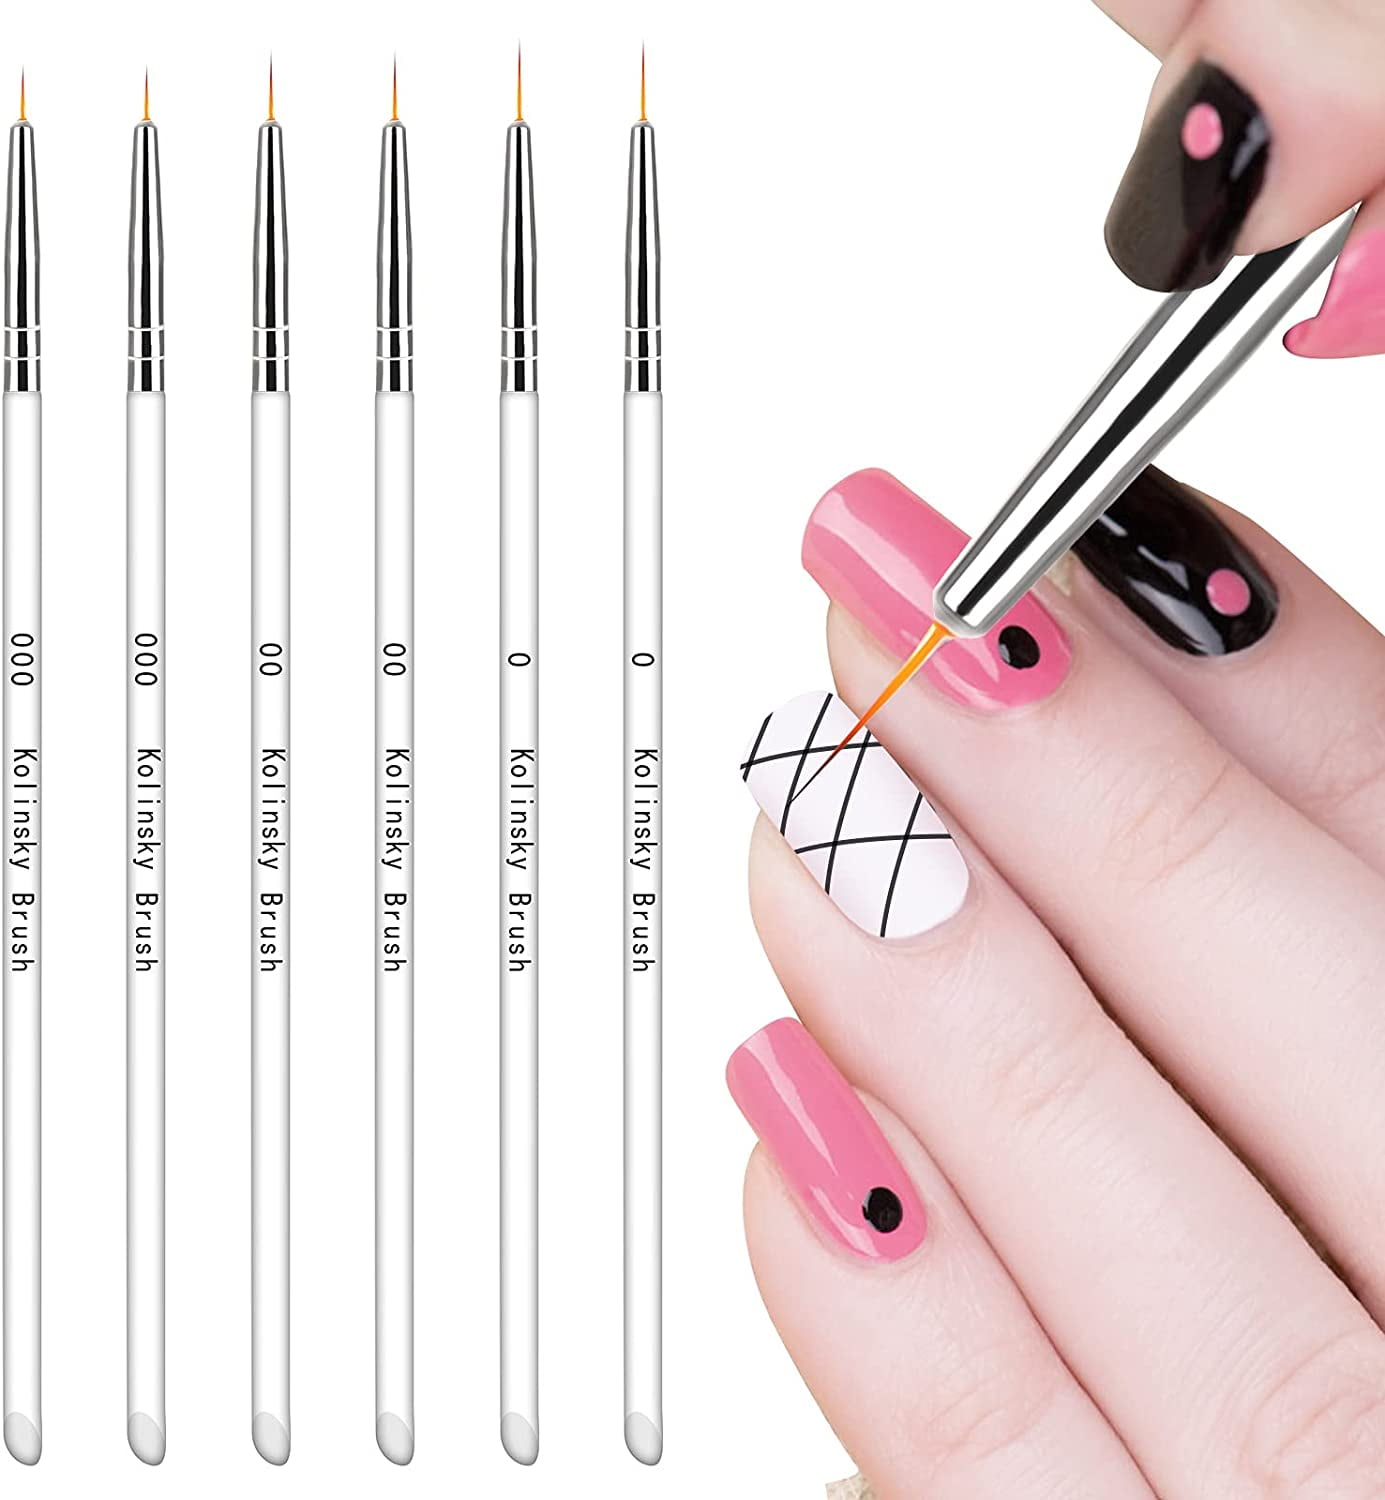 13 Best Nail Art Brushes for At Home Manicures in 2023